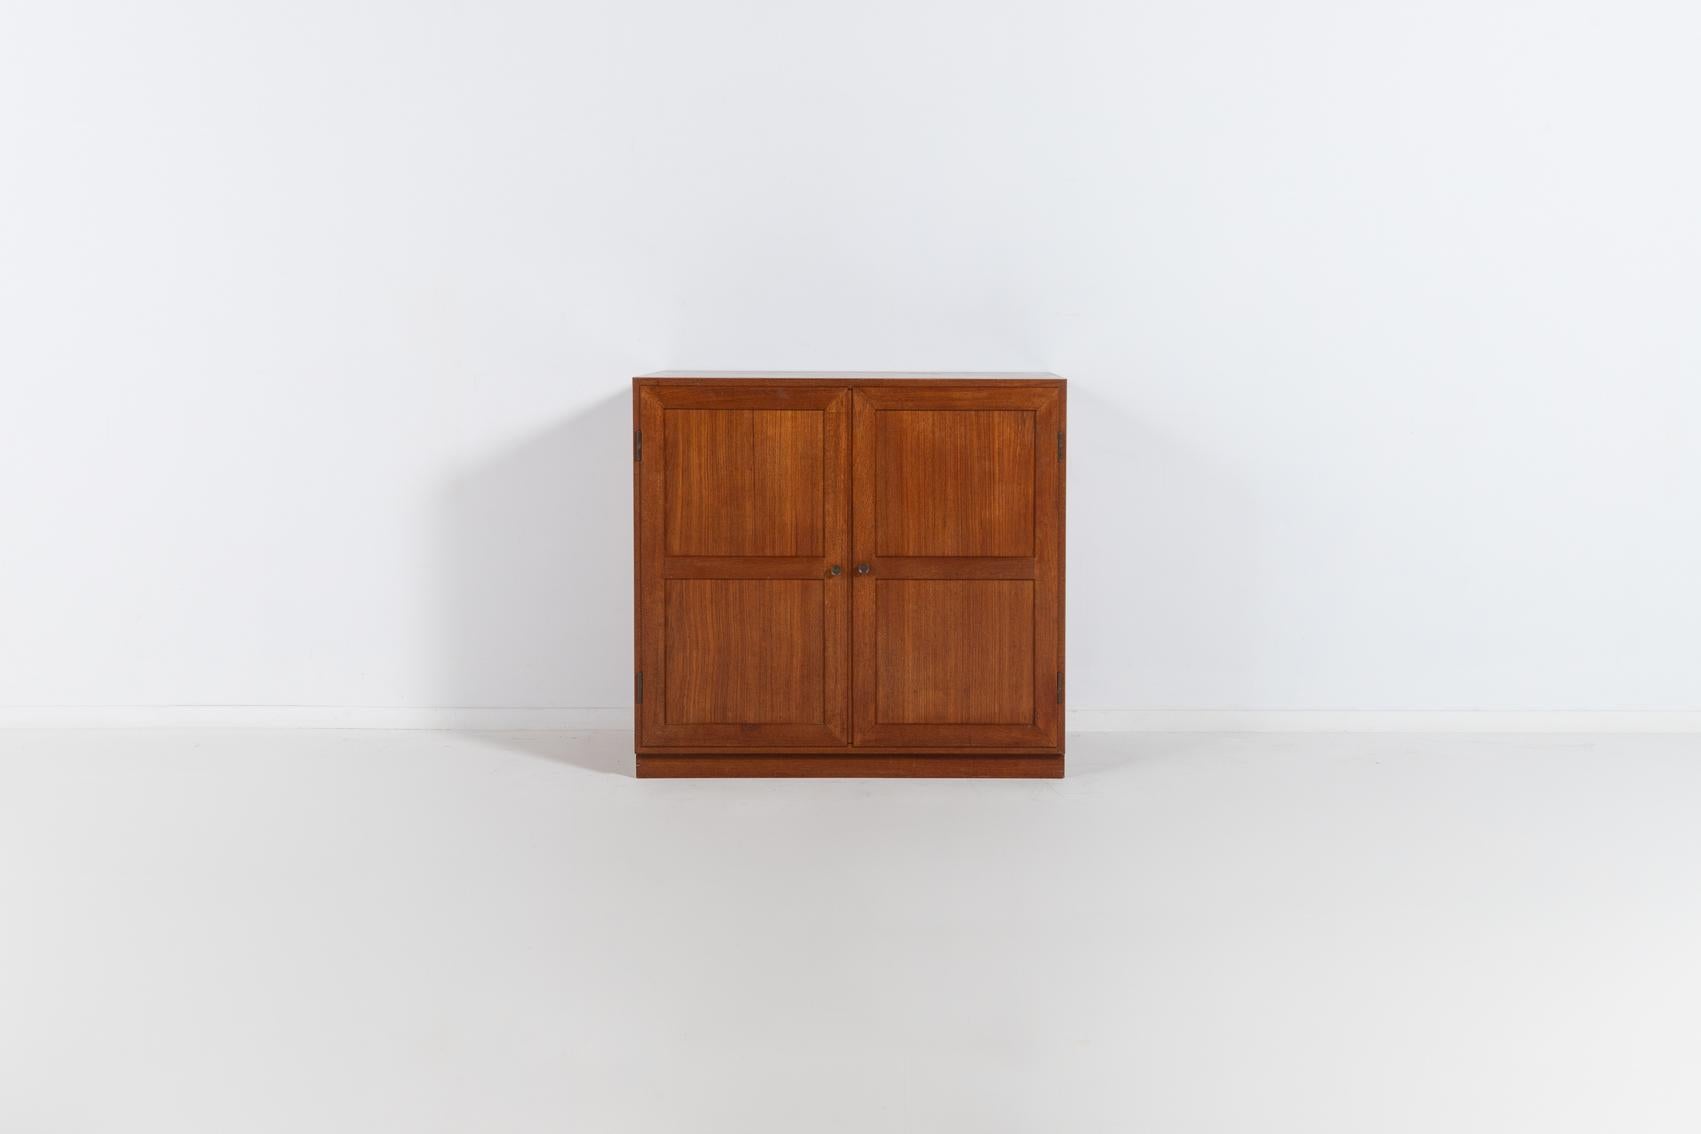 Rare set of 3 teak cabinets by Tove & Edvard Kindt-Larsen for Thorald Madsens In Good Condition For Sale In TOLLEBEEK, NL